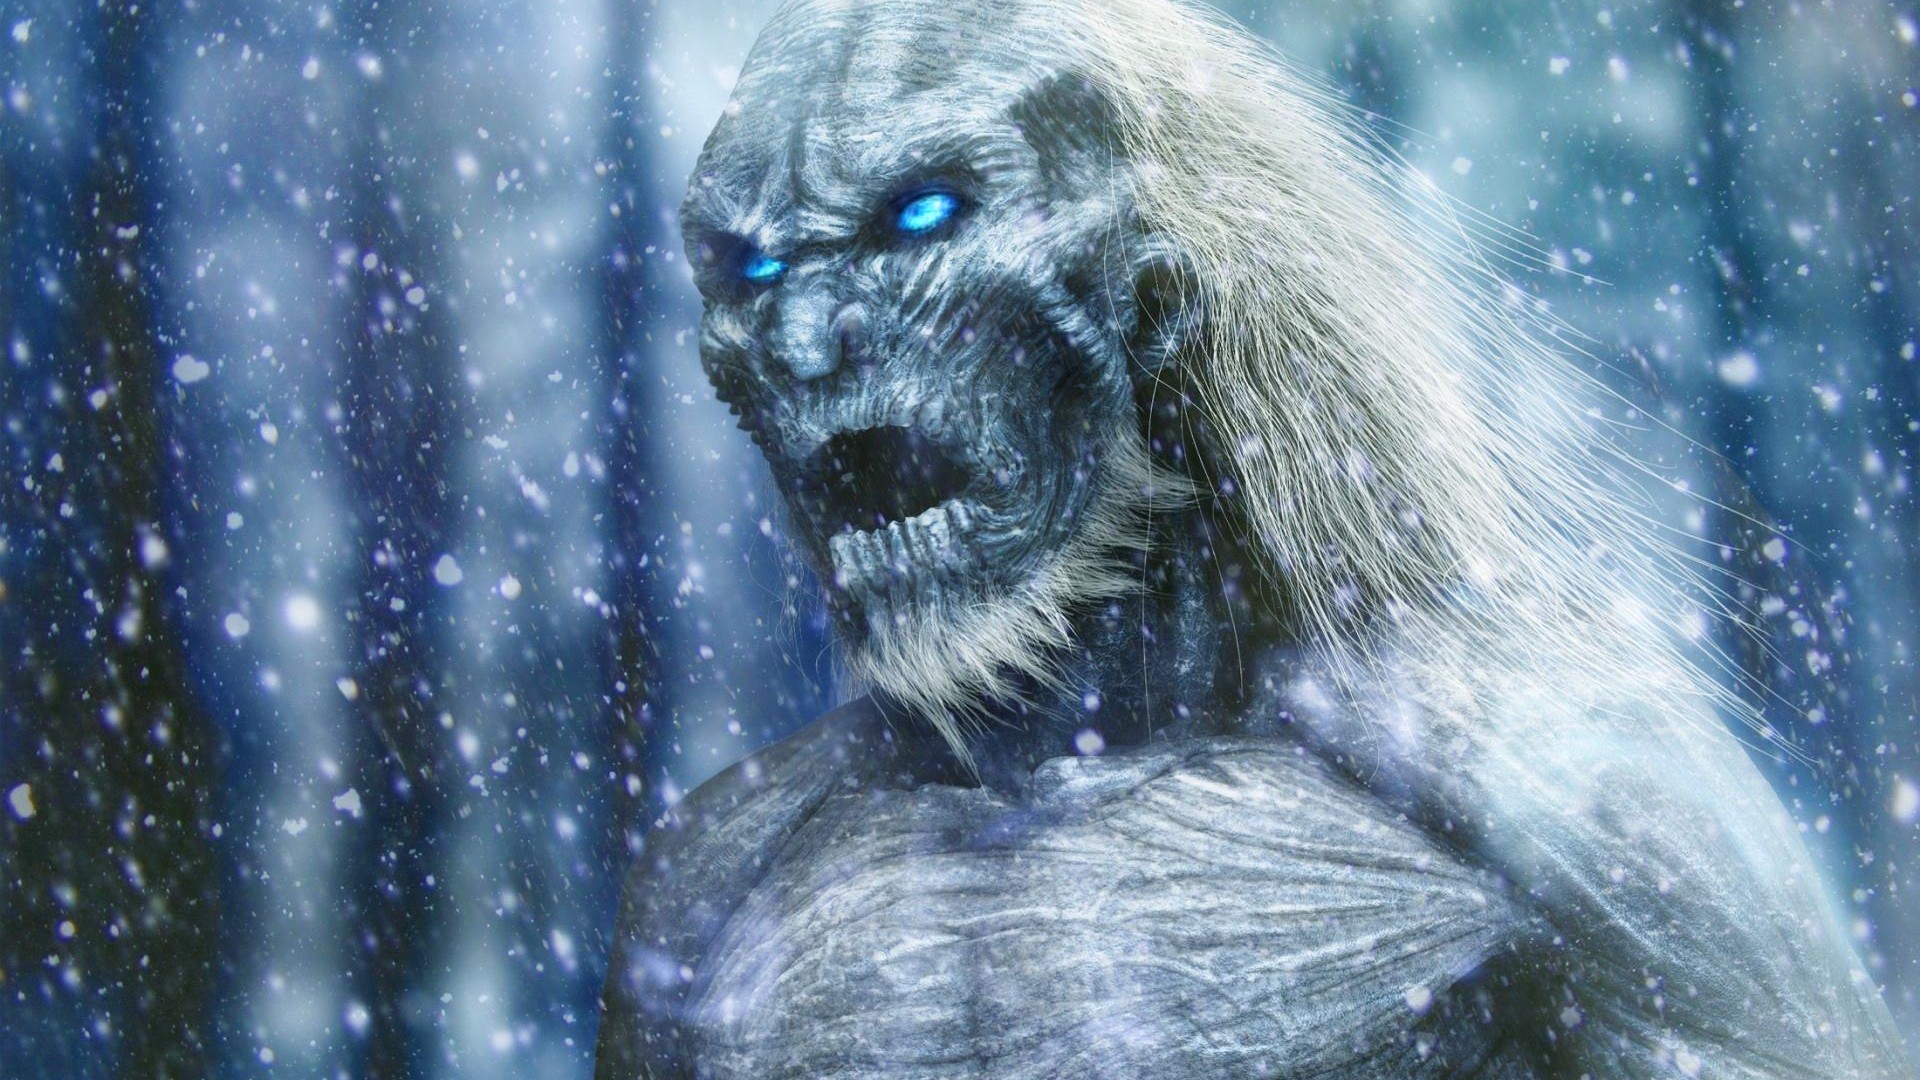 Download game of thrones white walkers wallpaper HD wallpaper 1920x1080